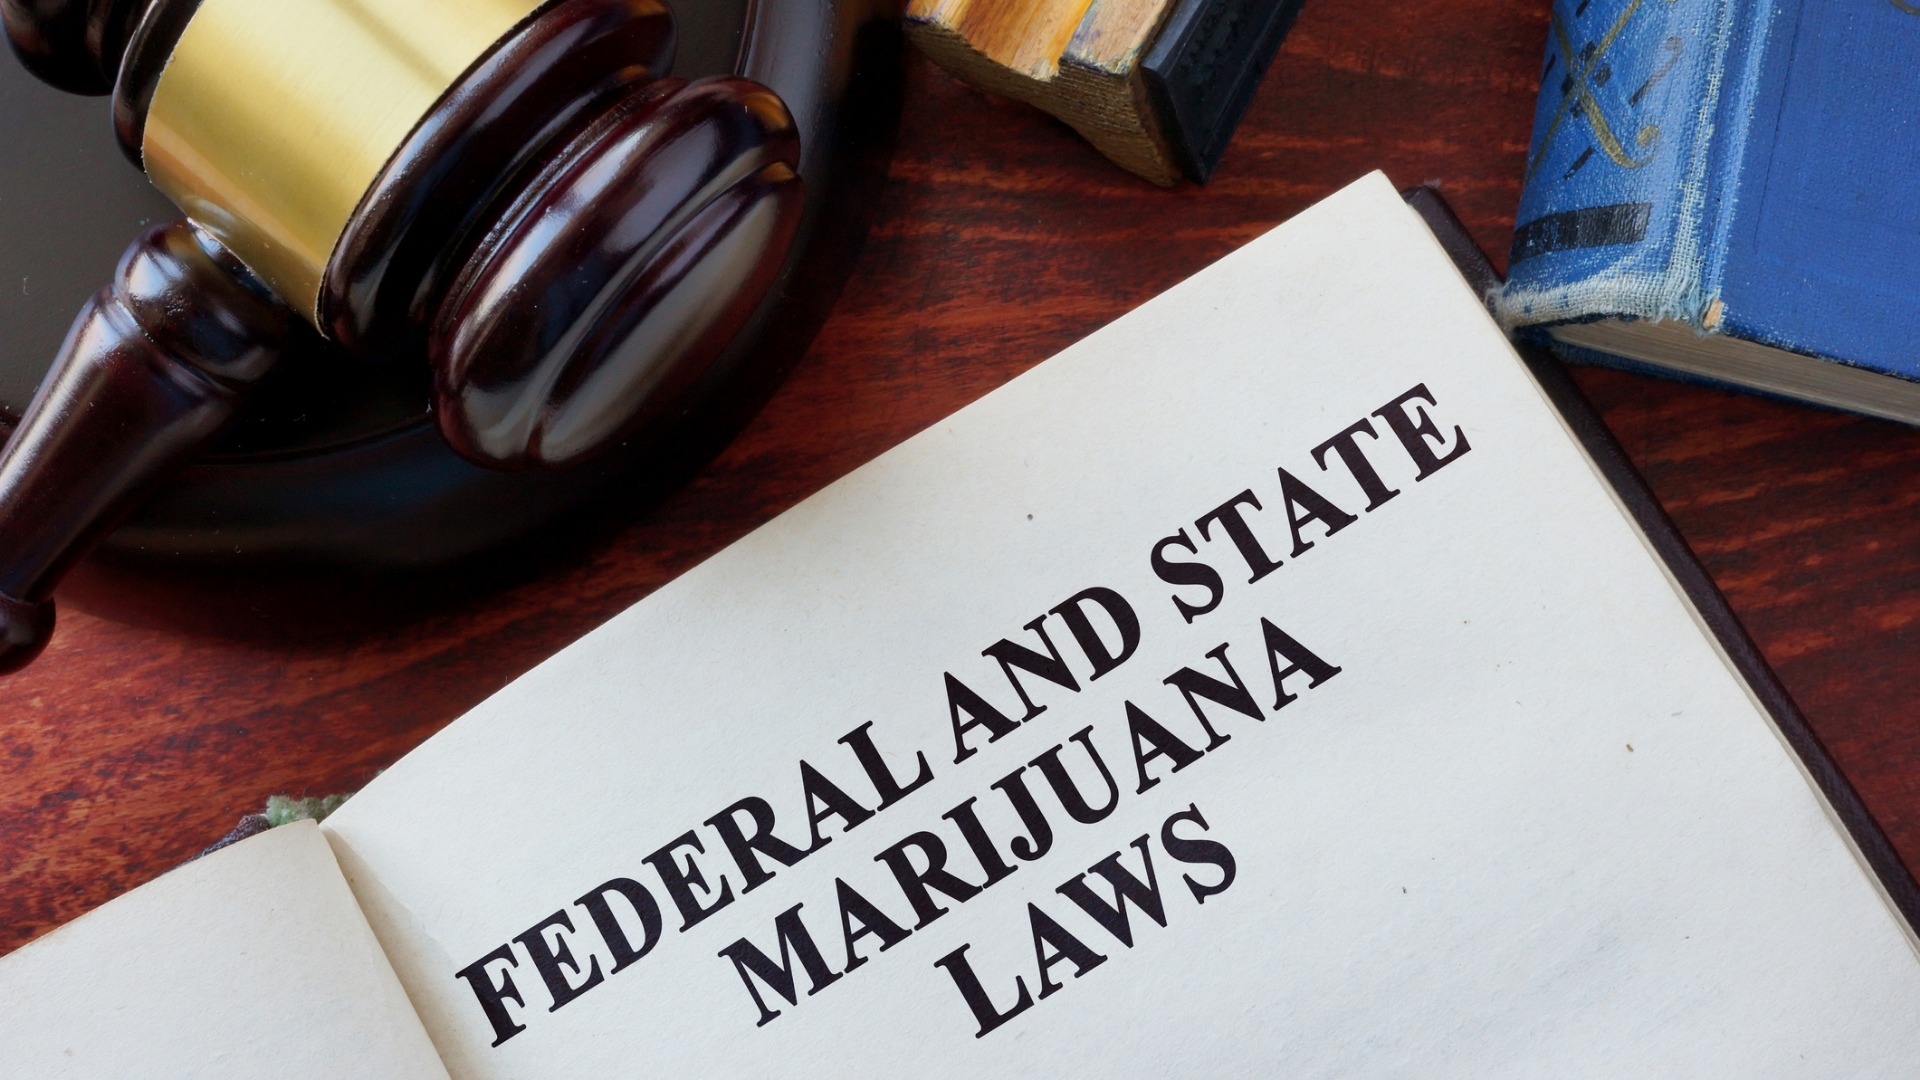 Federal and State Marijuana Laws title on a book and gavel.